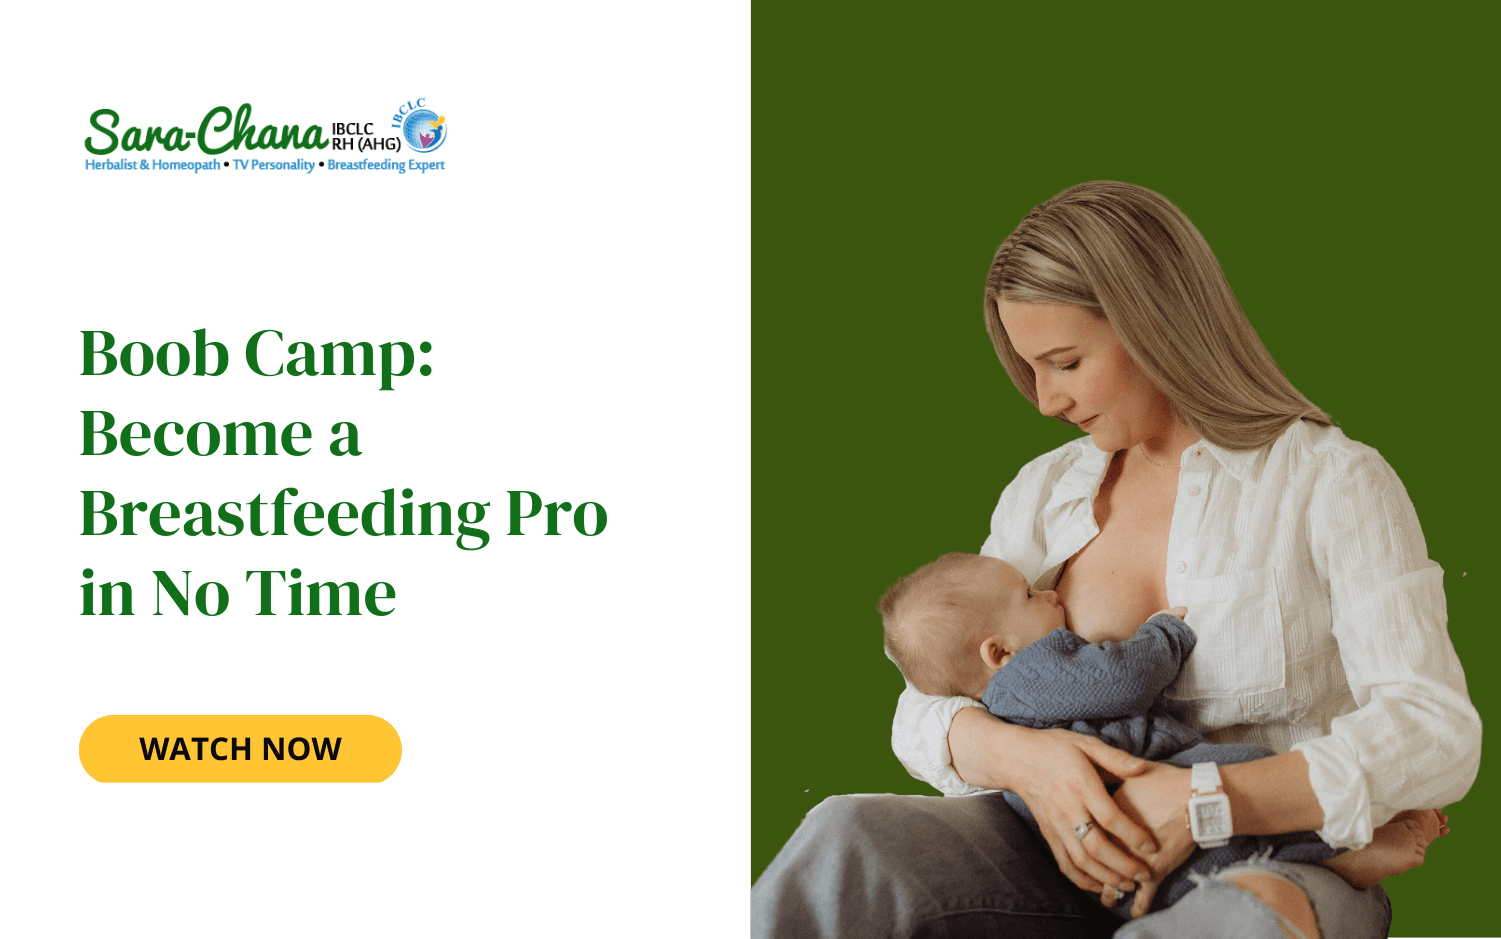 Boob Camp: Become a Breastfeeding Pro in No Time